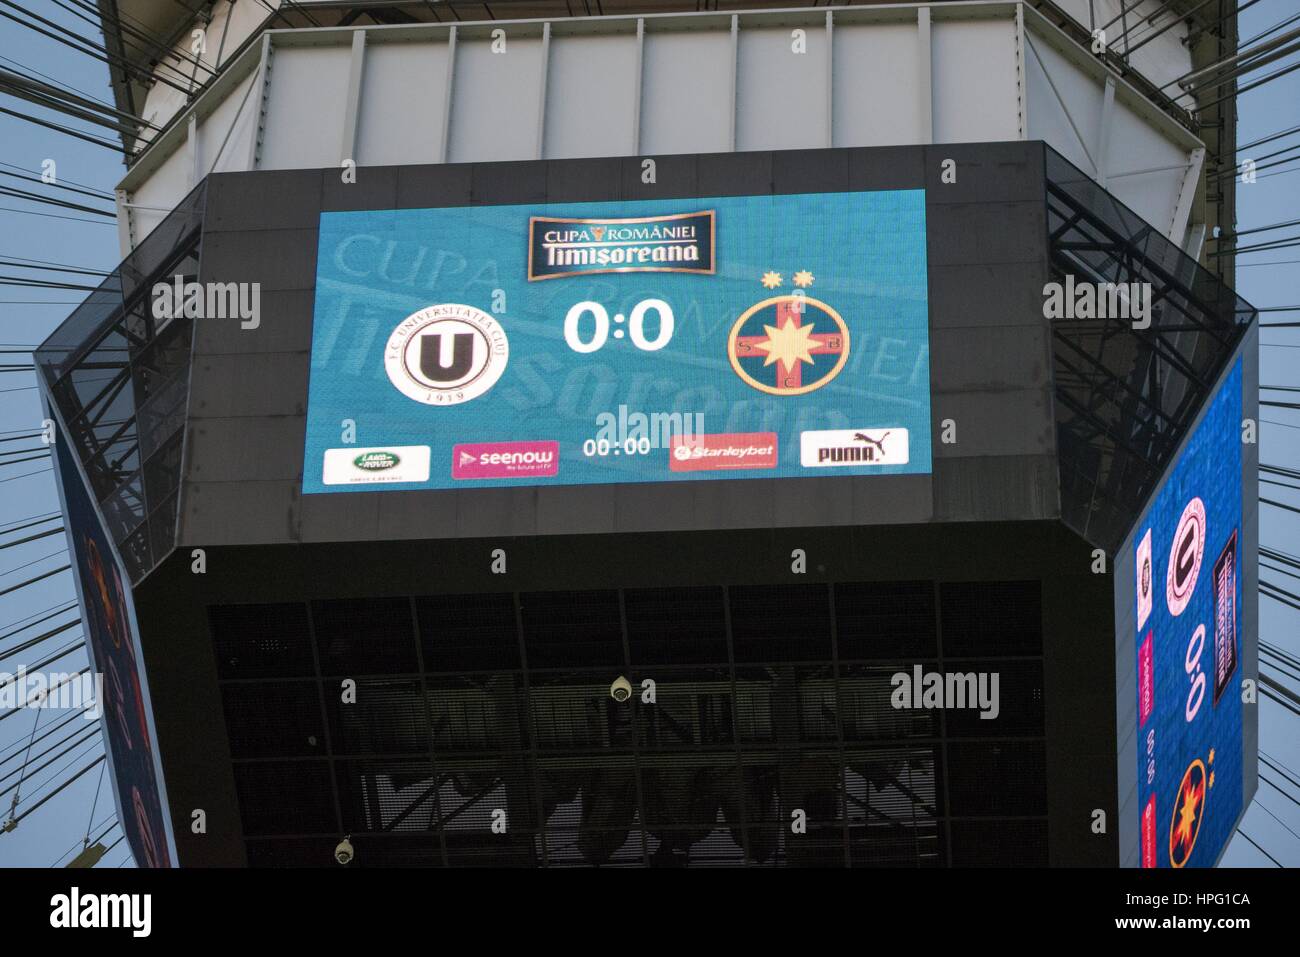 May 31, 2015: The stadium scoreboard at the begining of the Cupa Romaniei Timisoreana 2014-2015 Finals (Romania Cup Timisoreana Finals) game between FC Universitatea Cluj ROU and FC Steaua Bucharest ROU at National Arena, Bucharest,  Romania ROU. Foto: Catalin Soare Stock Photo